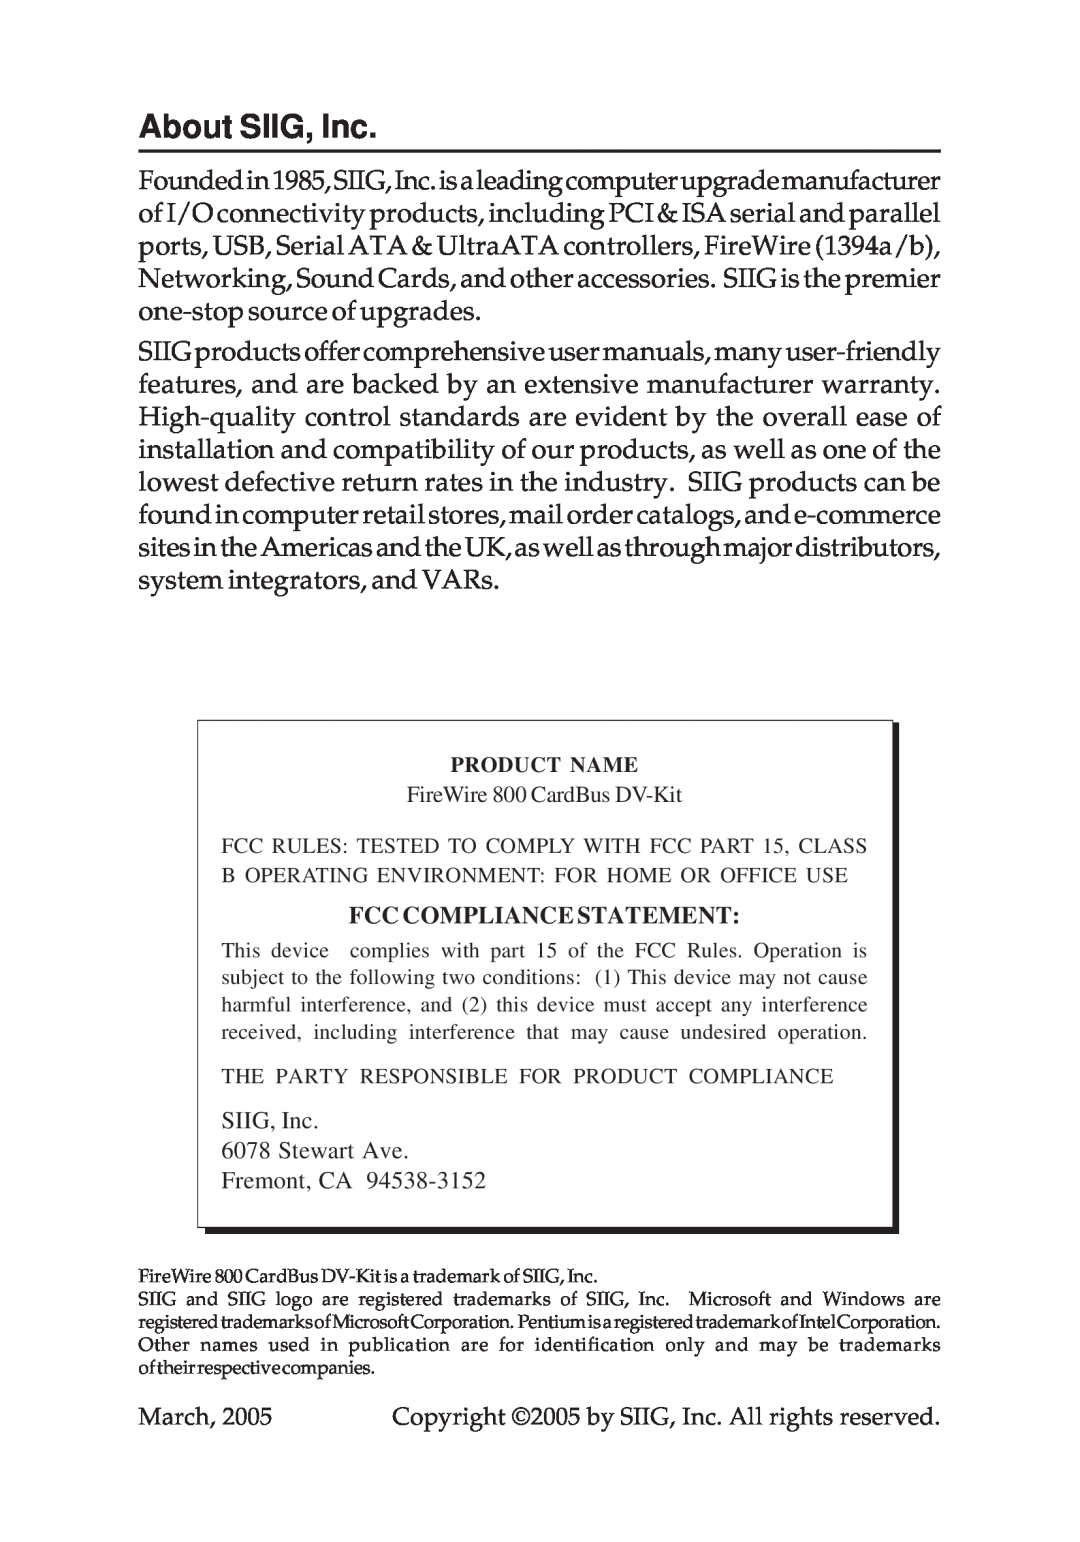 SIIG 700 manual About SIIG, Inc, Fcc Compliance Statement 